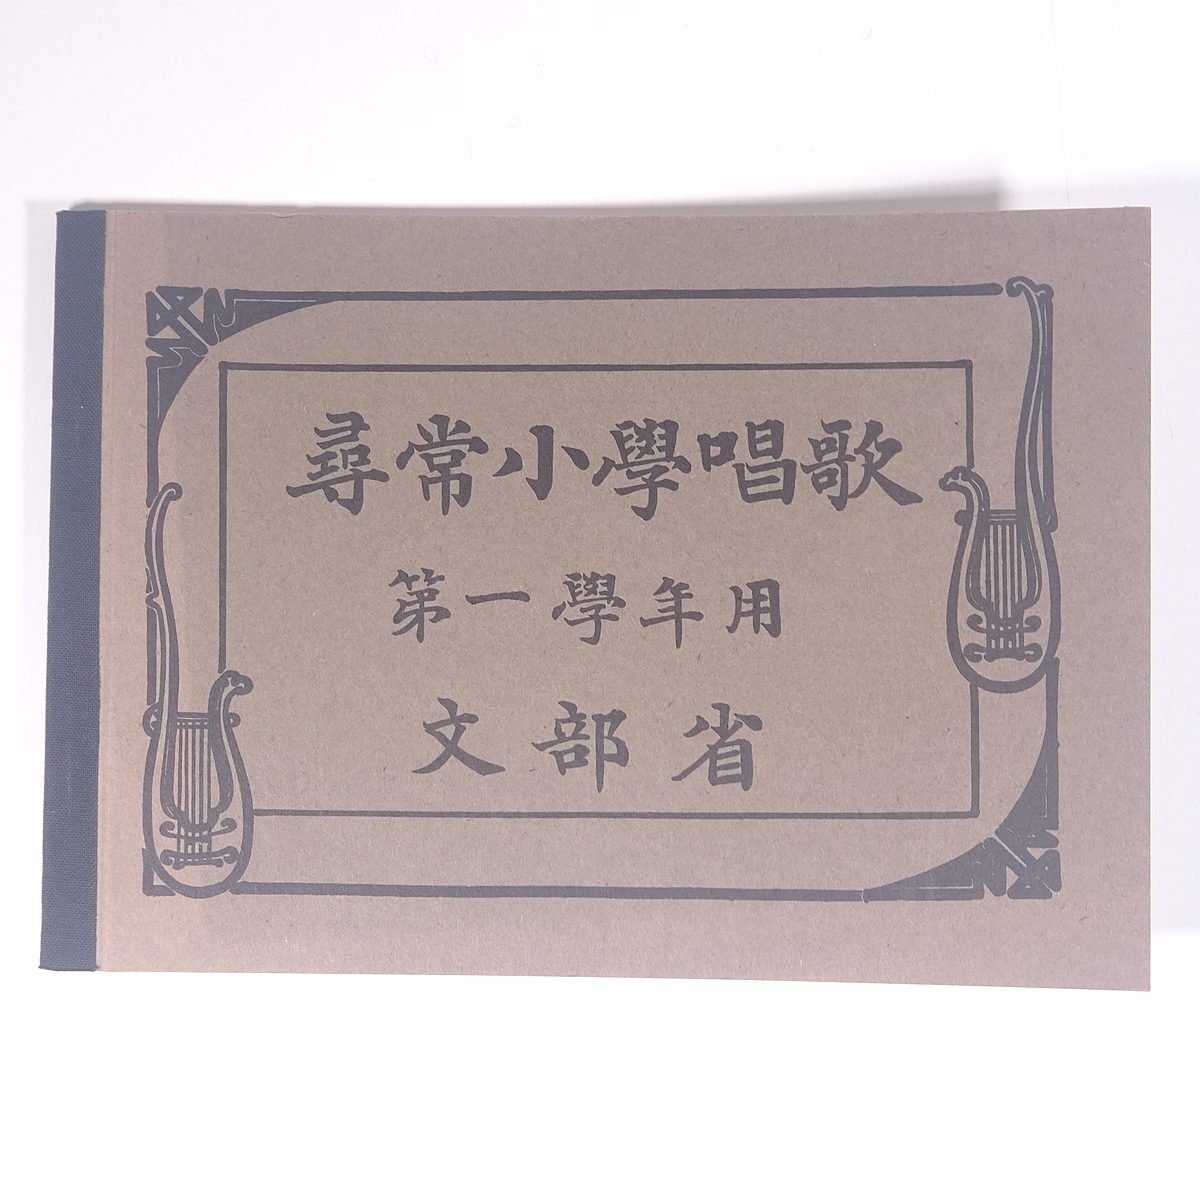 [ reprint ].. small . song the first . year for writing part . Ooita prefecture hot water cloth . block hot water. tsubo 1988 separate volume textbook .. elementary school musical score 